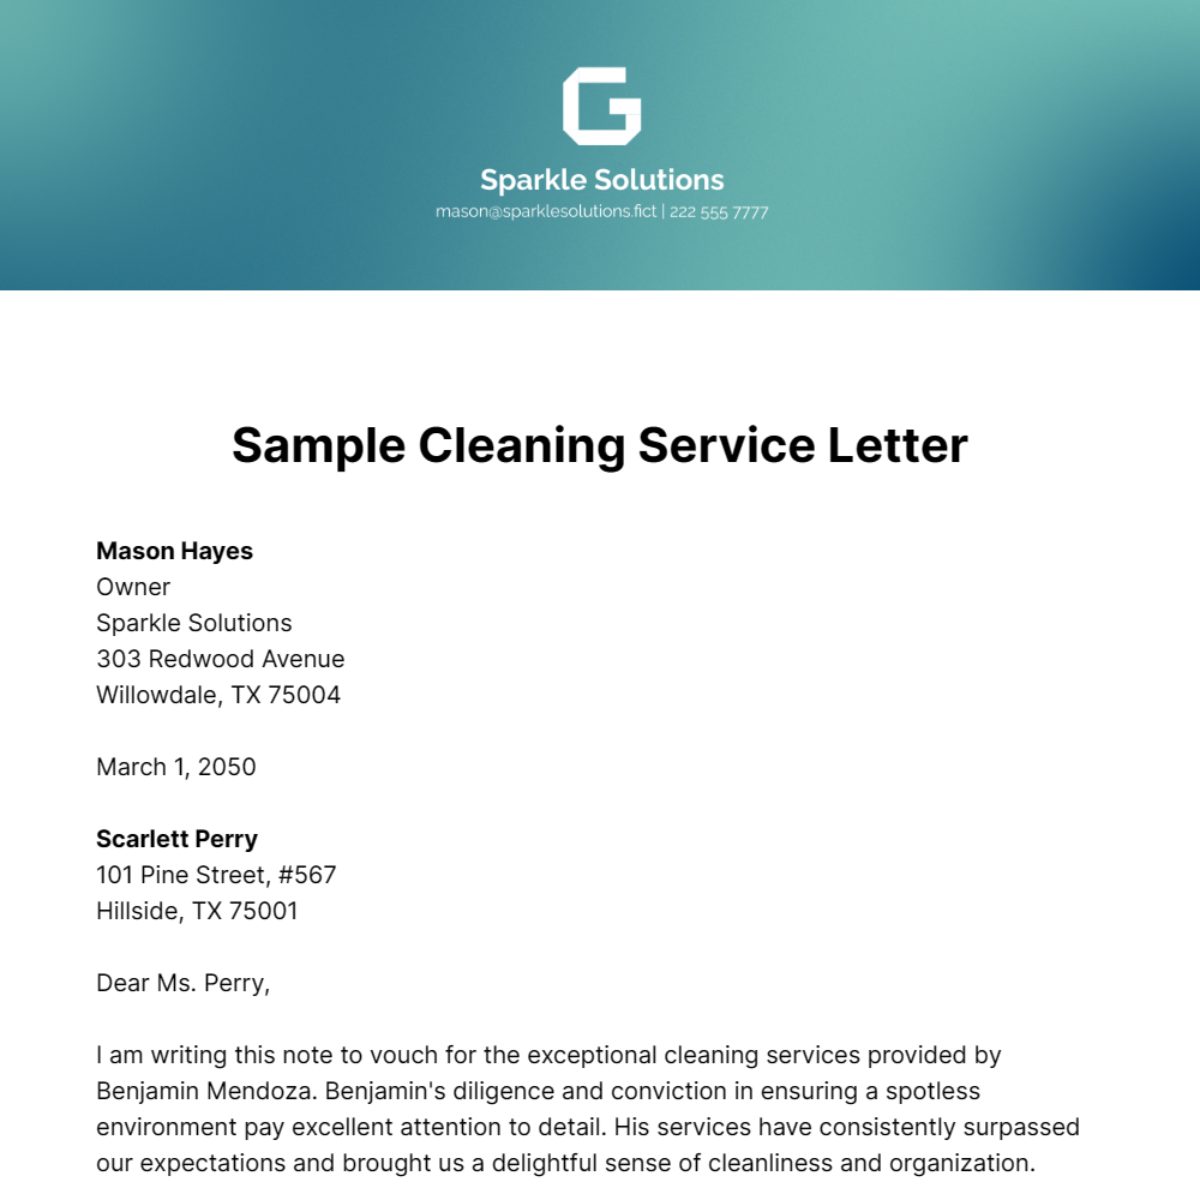 Sample Cleaning Service Letter Template